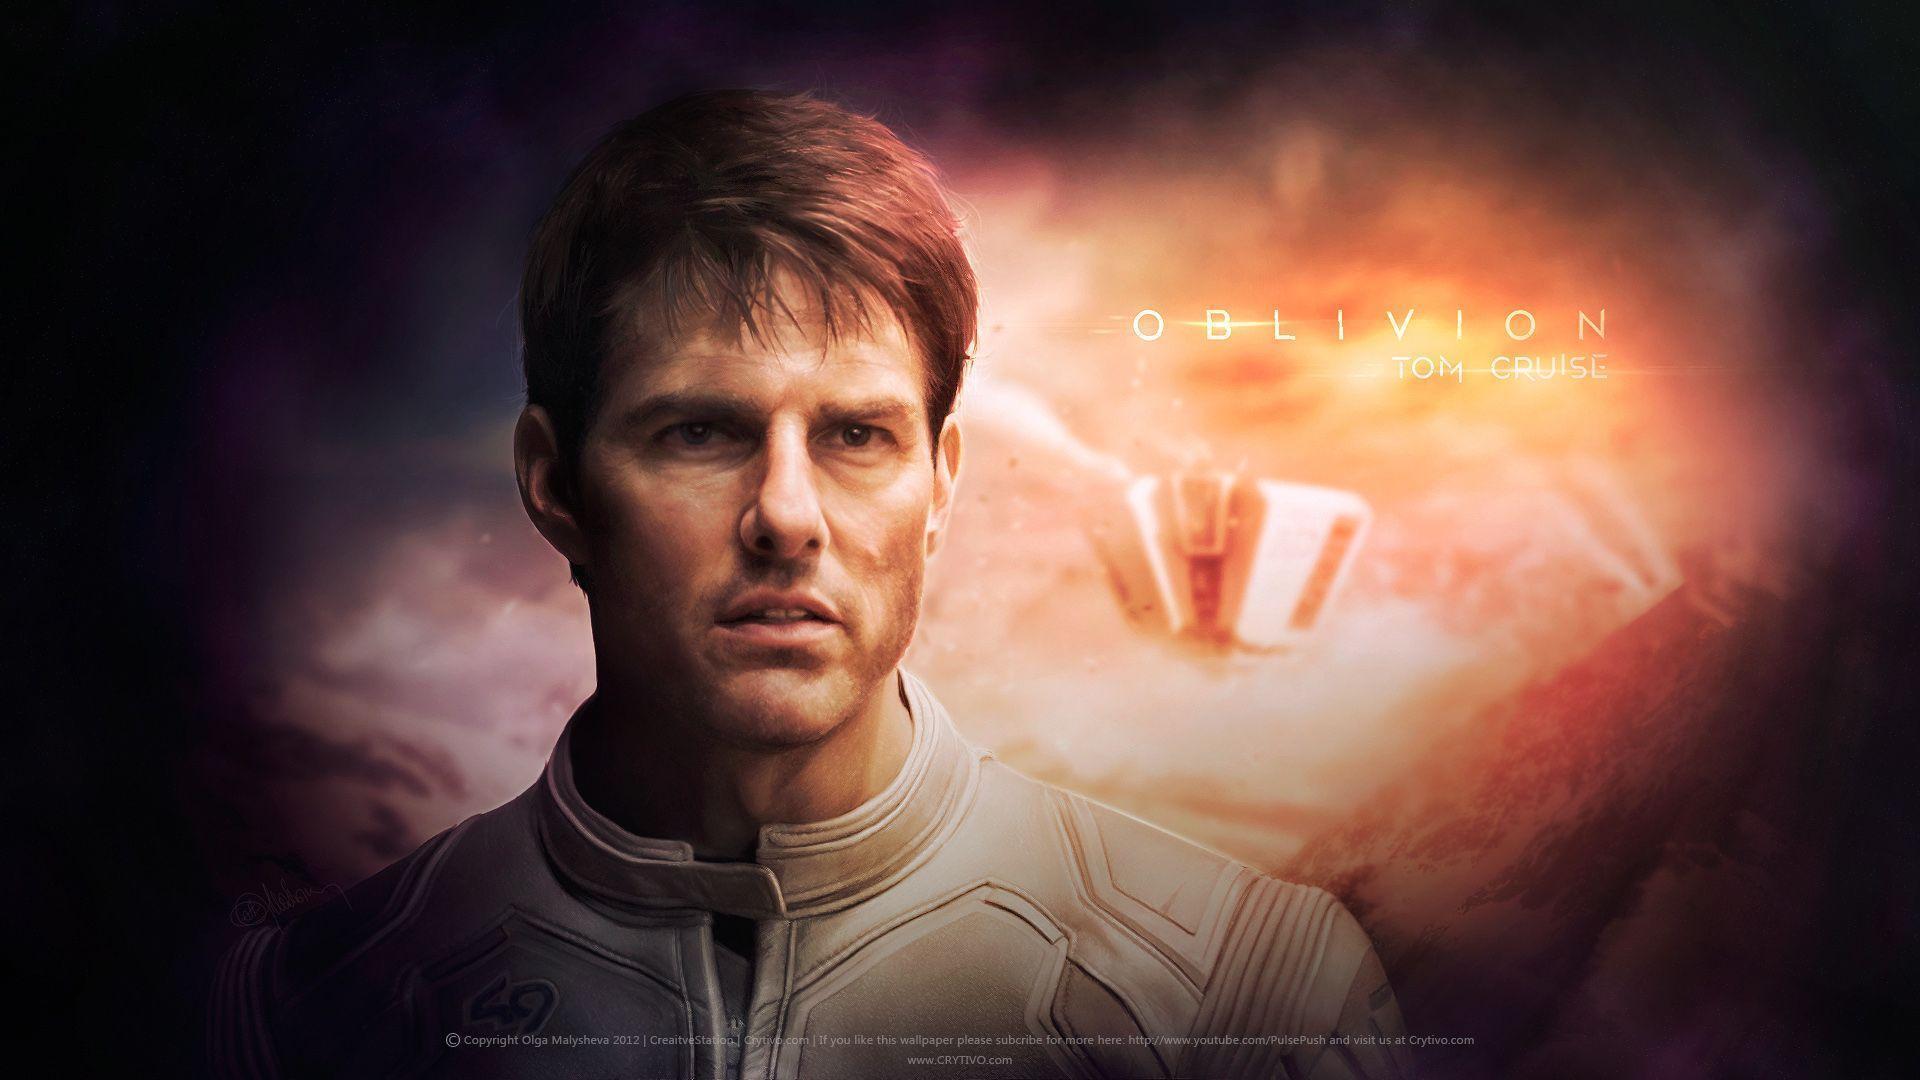 Tom Cruise Wallpaper Theme With 10 Background